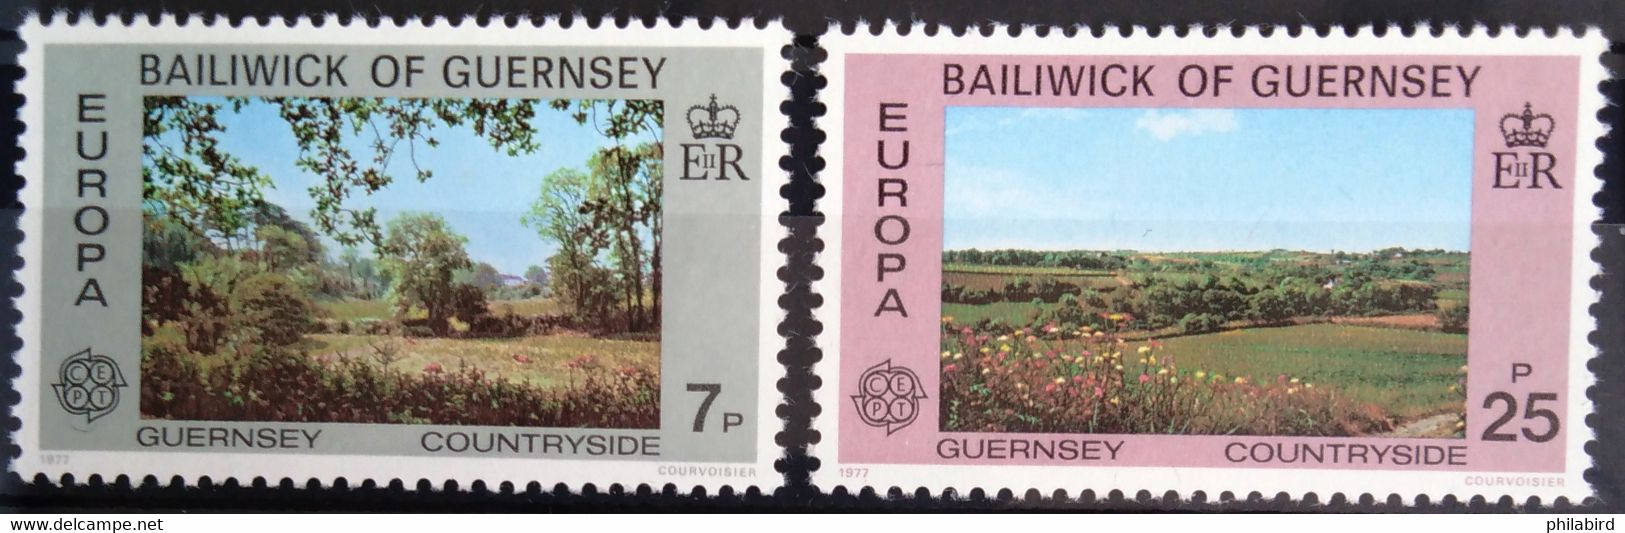 EUROPA 1977 - GUERNESEY                    N° 142/143                        NEUF** - 1977